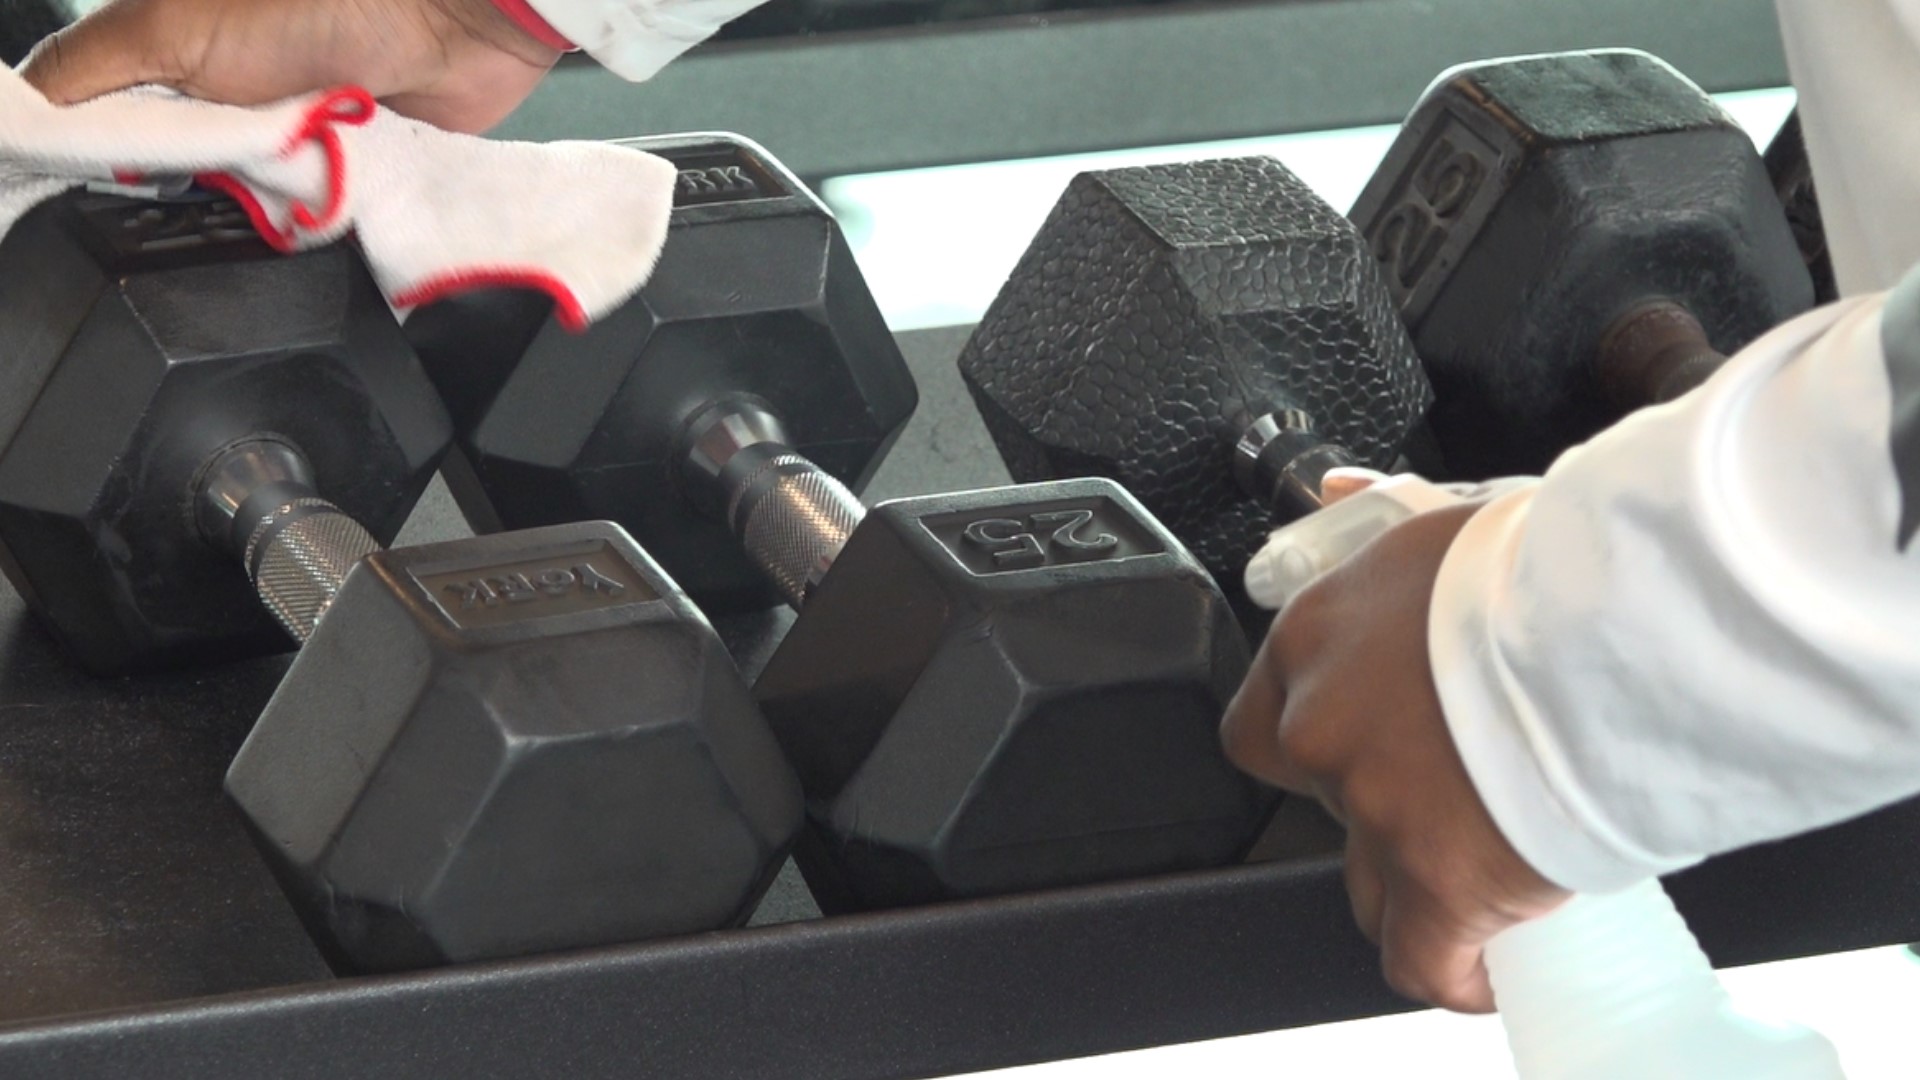 Cleanliness and organization of a gym can make or break a workout! That's why trainers at the York JCC are showing us some good manners to practice at the gym!